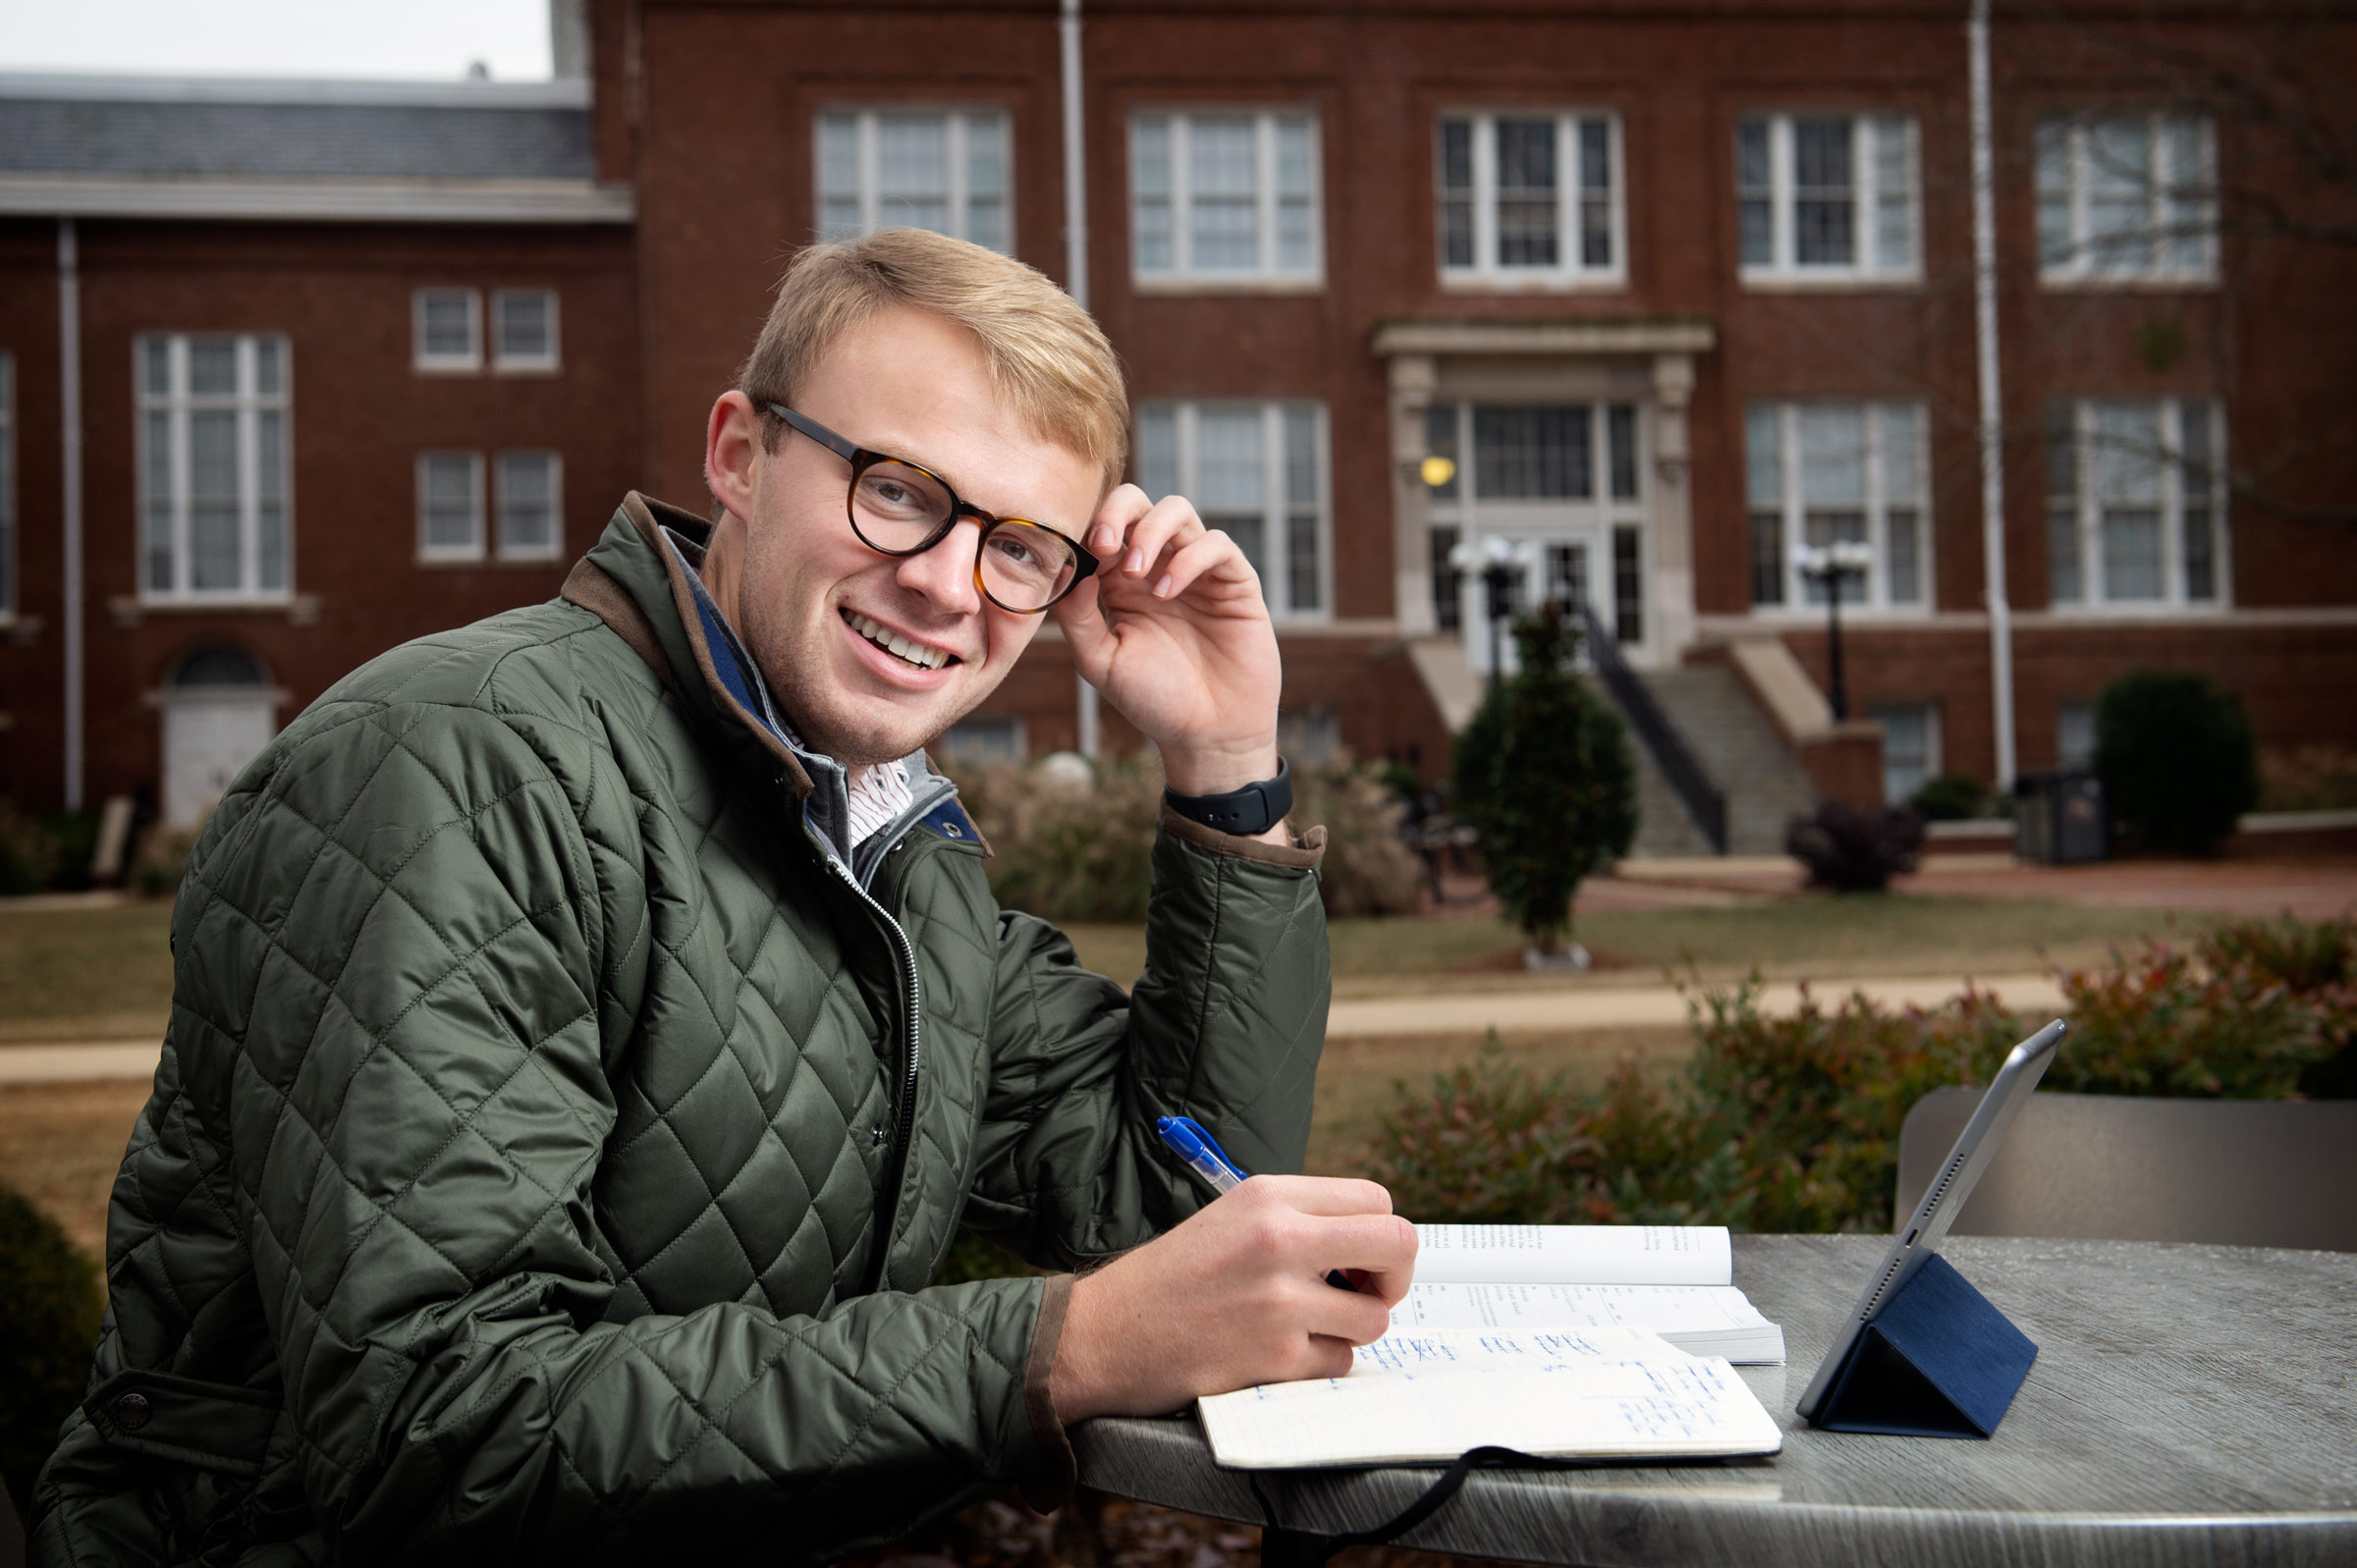 Reid Stevens, pictured at a table in front of Colvard Student Union with Lee Hall in the background